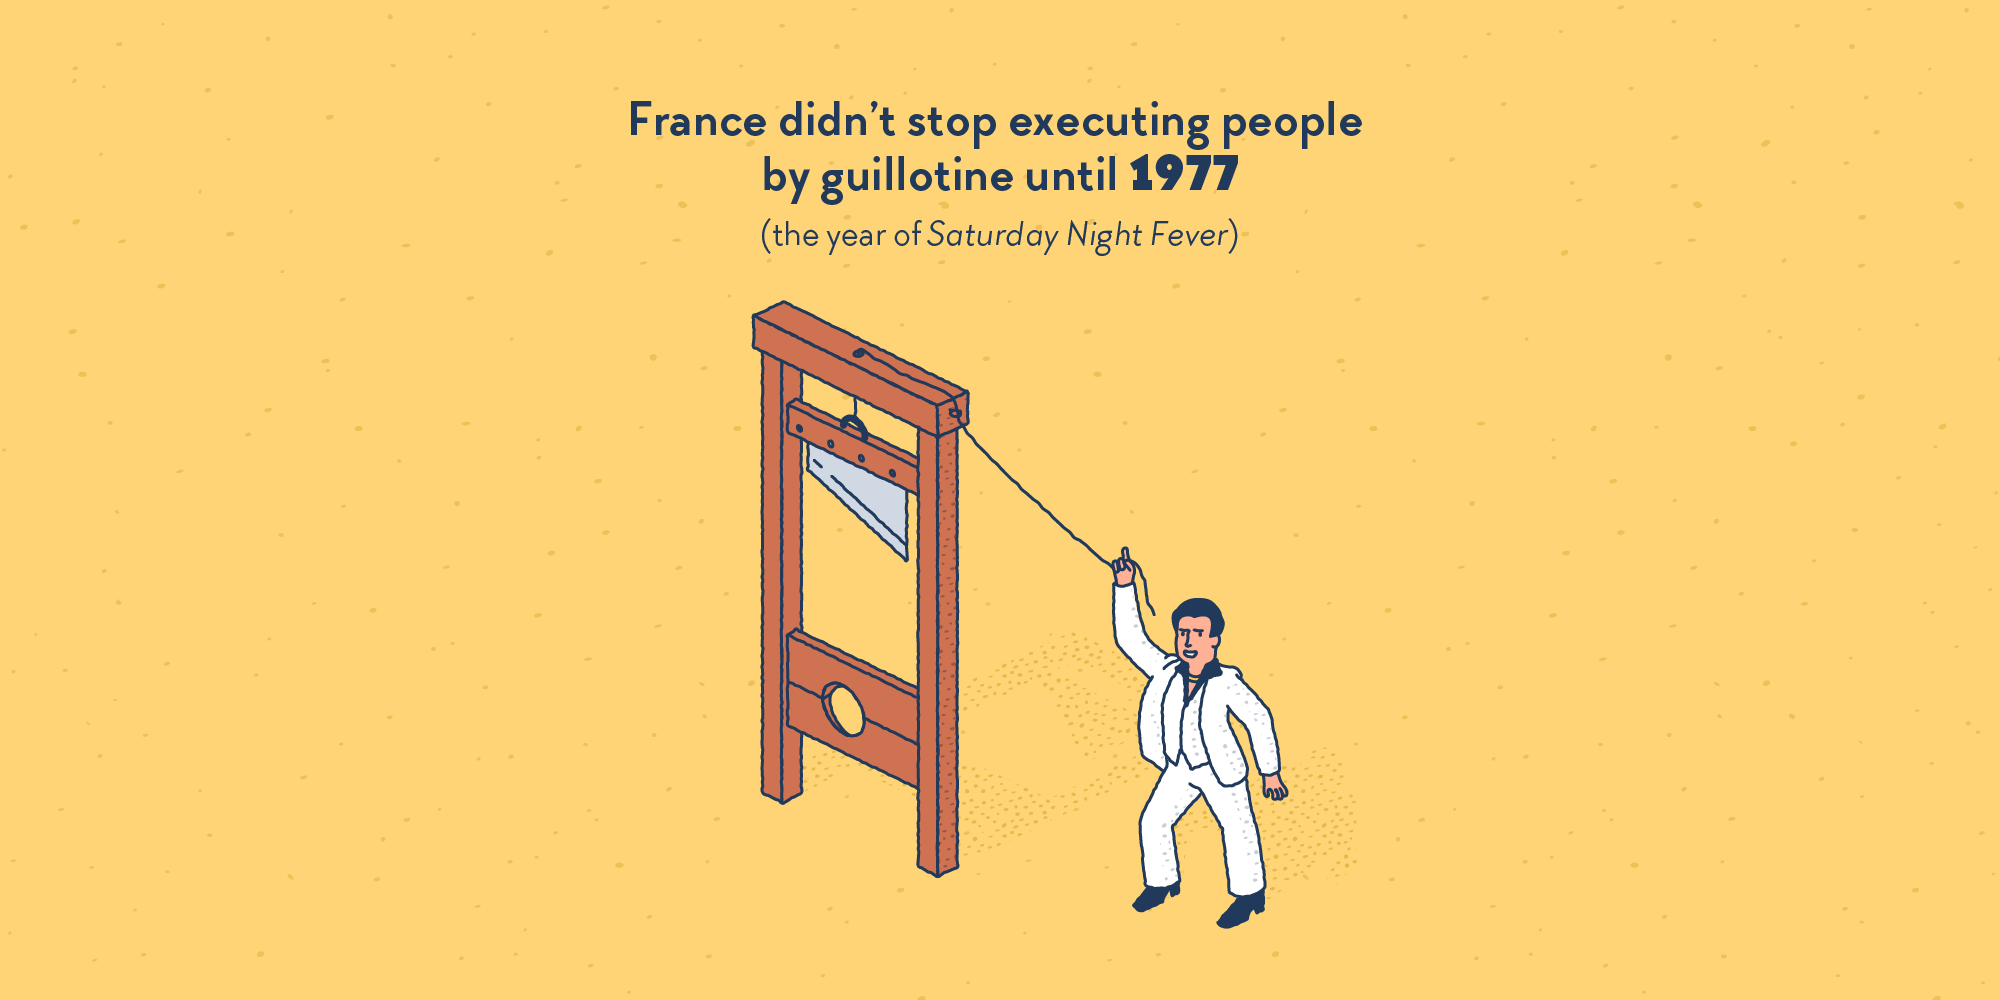 A guillotine, triggered by a dancing John Travolta in a white suit, as the film Saturday Night Fever was released in 1977 as well.